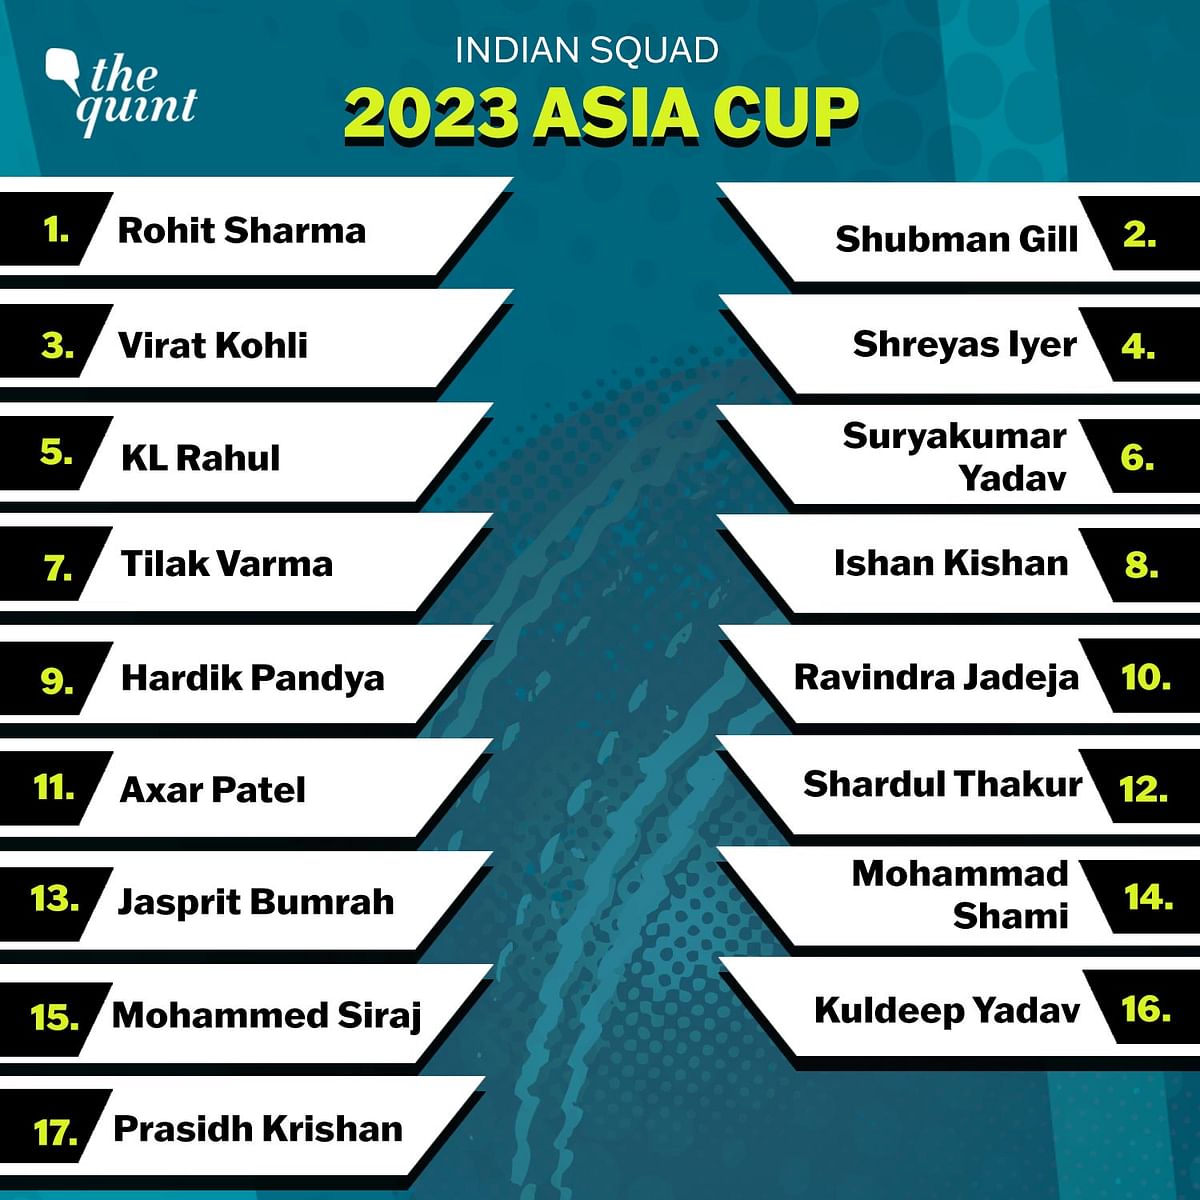 The BCCI has announced the 17 member squad for the 2023 Asia Cup.